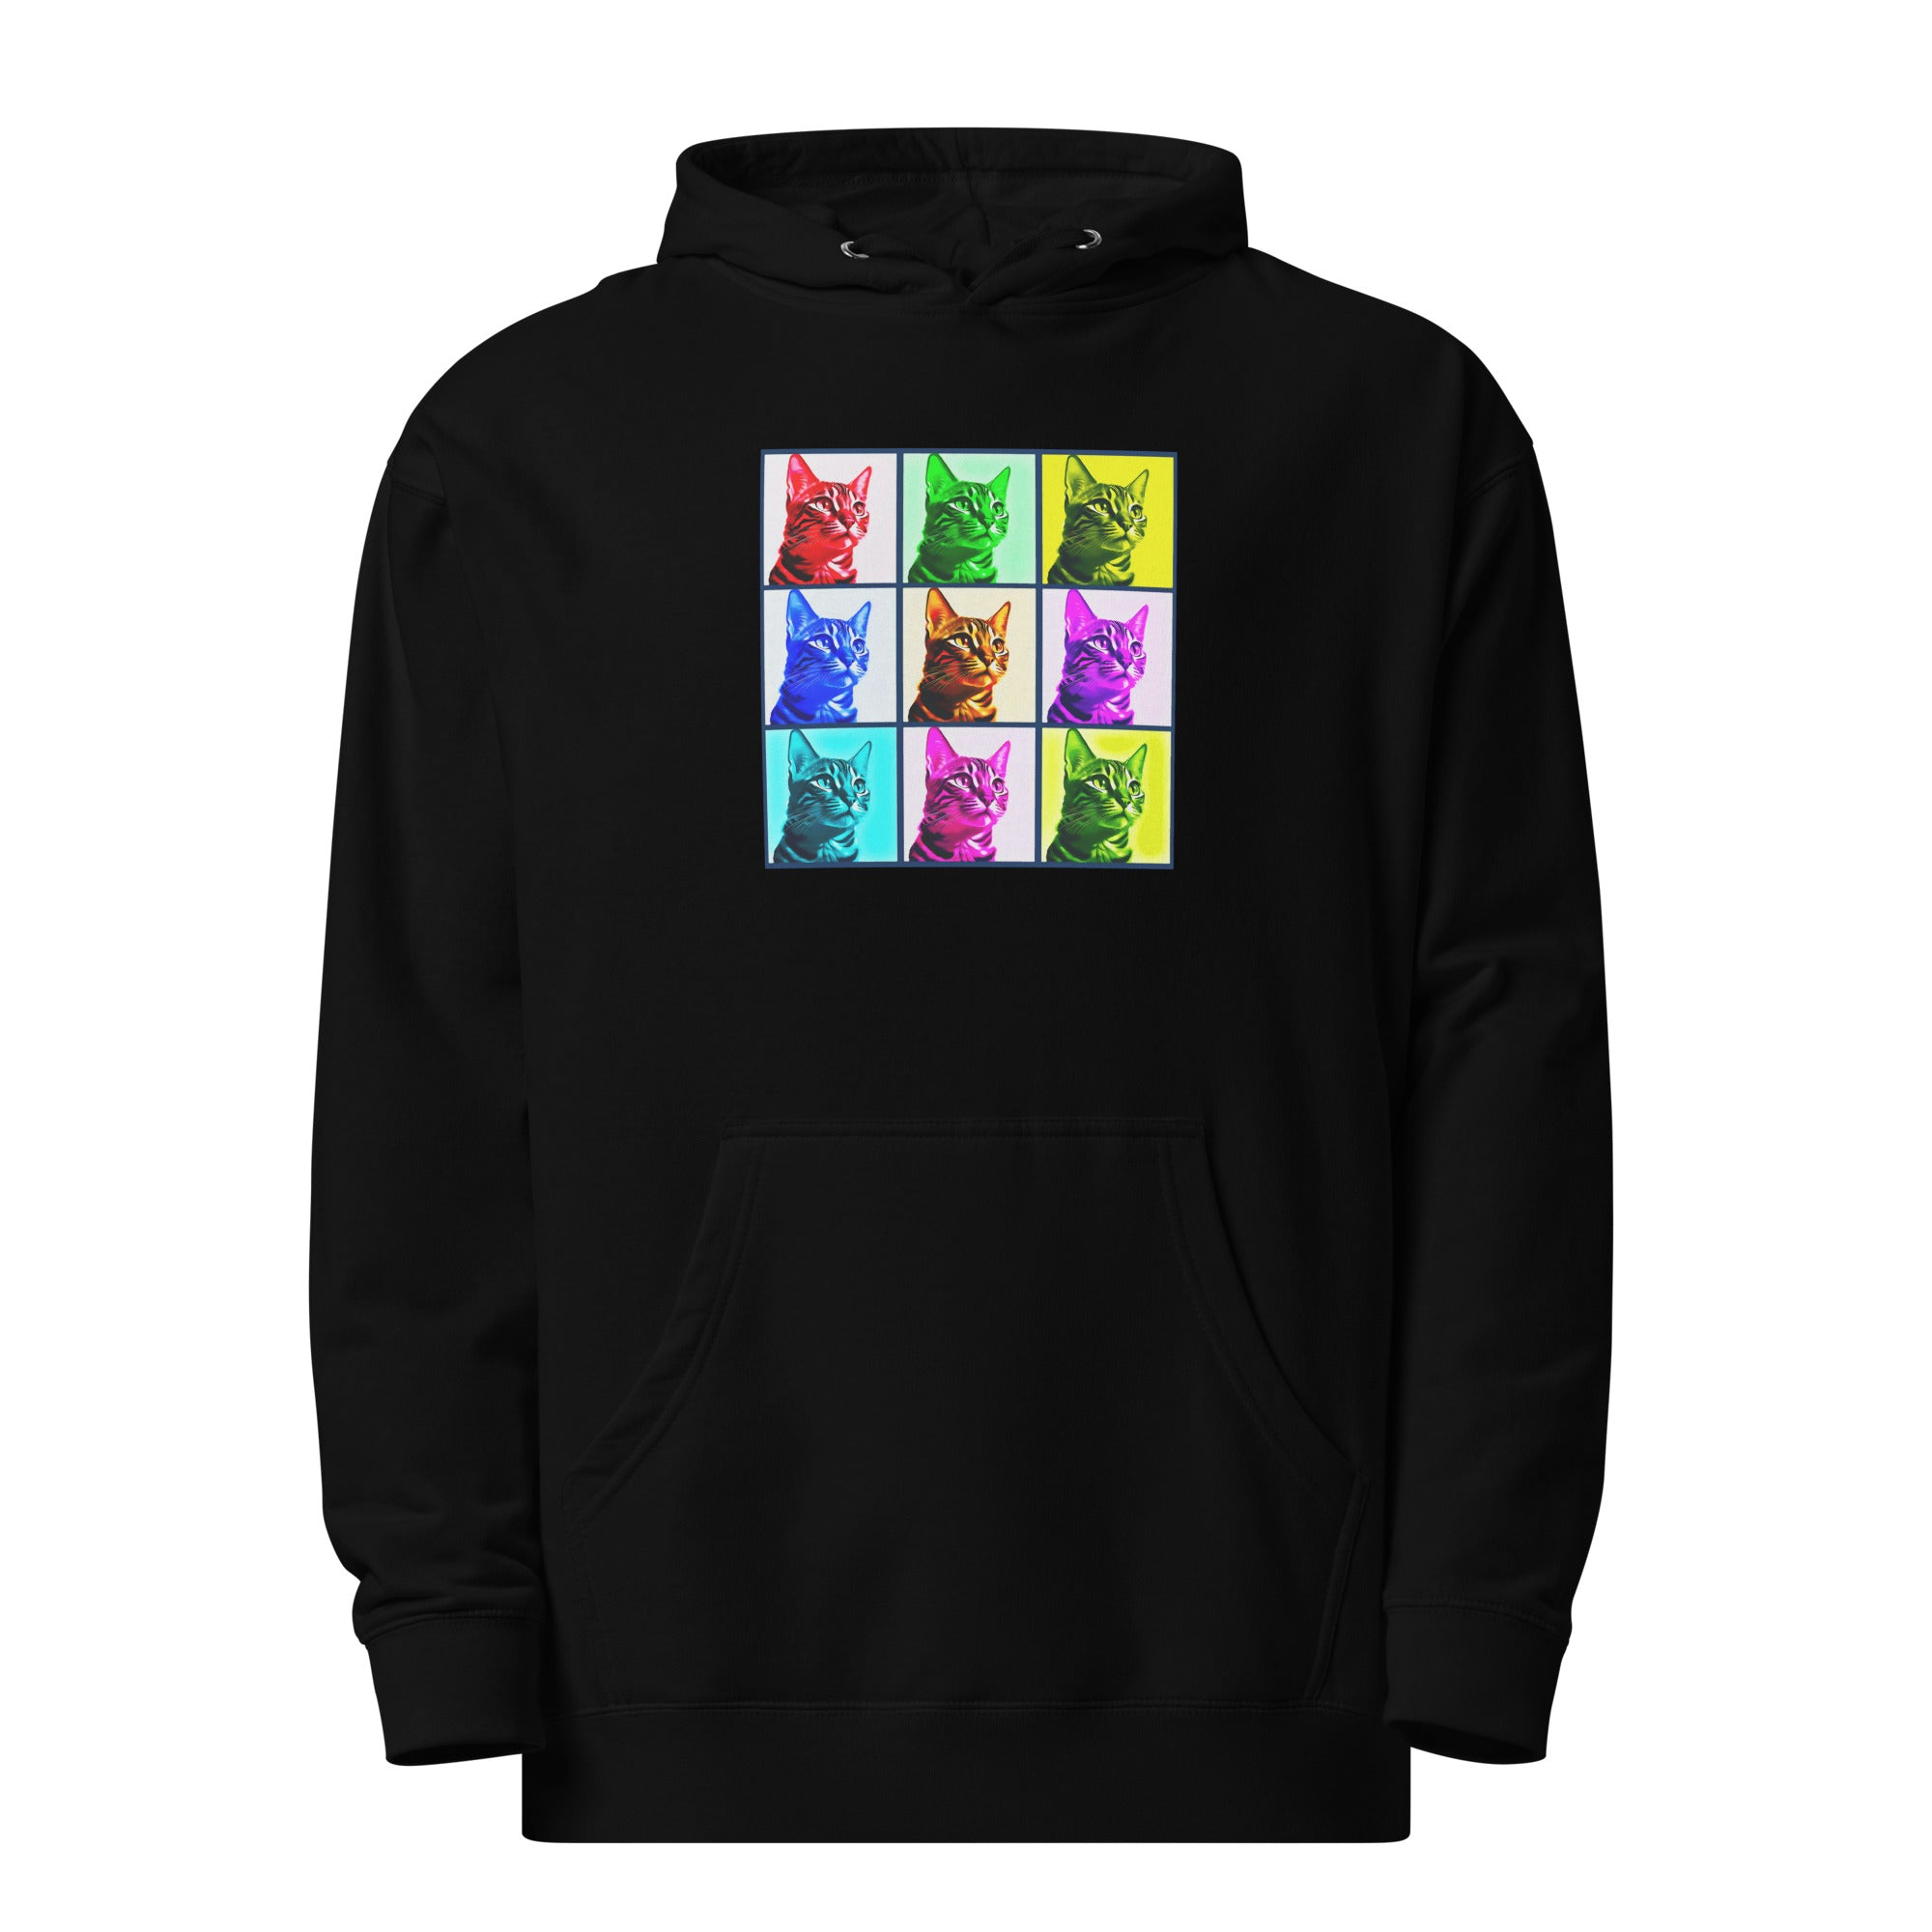 Warhol Cats Unisex midweight hoodie